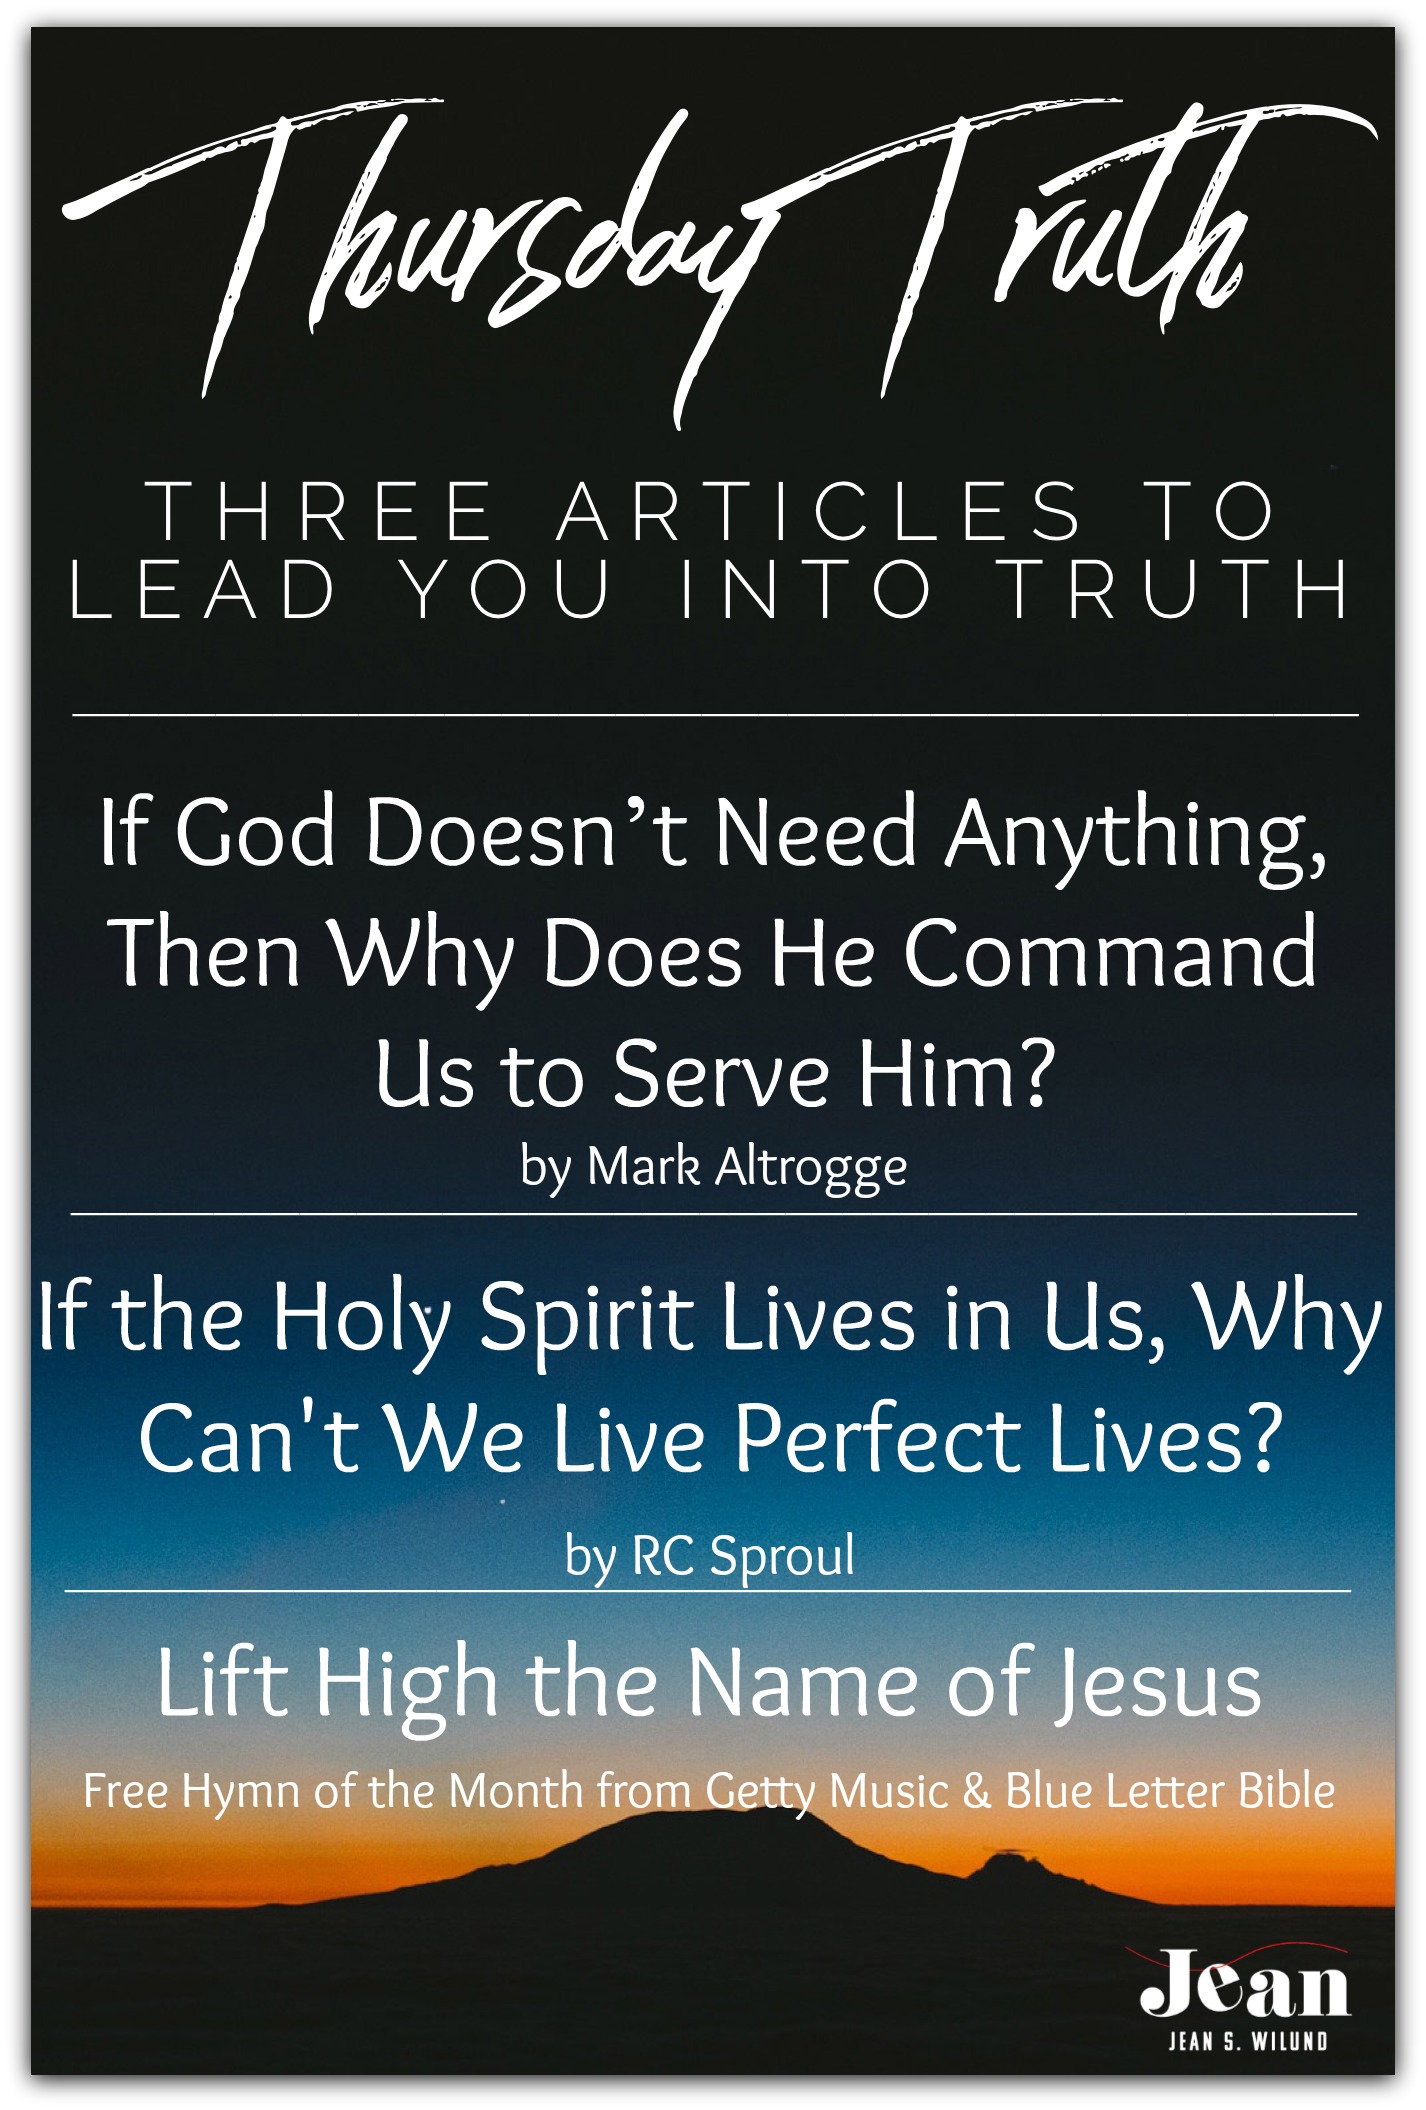 Thursday Truth: Three Articles To Lead You into Truth 09-20-18